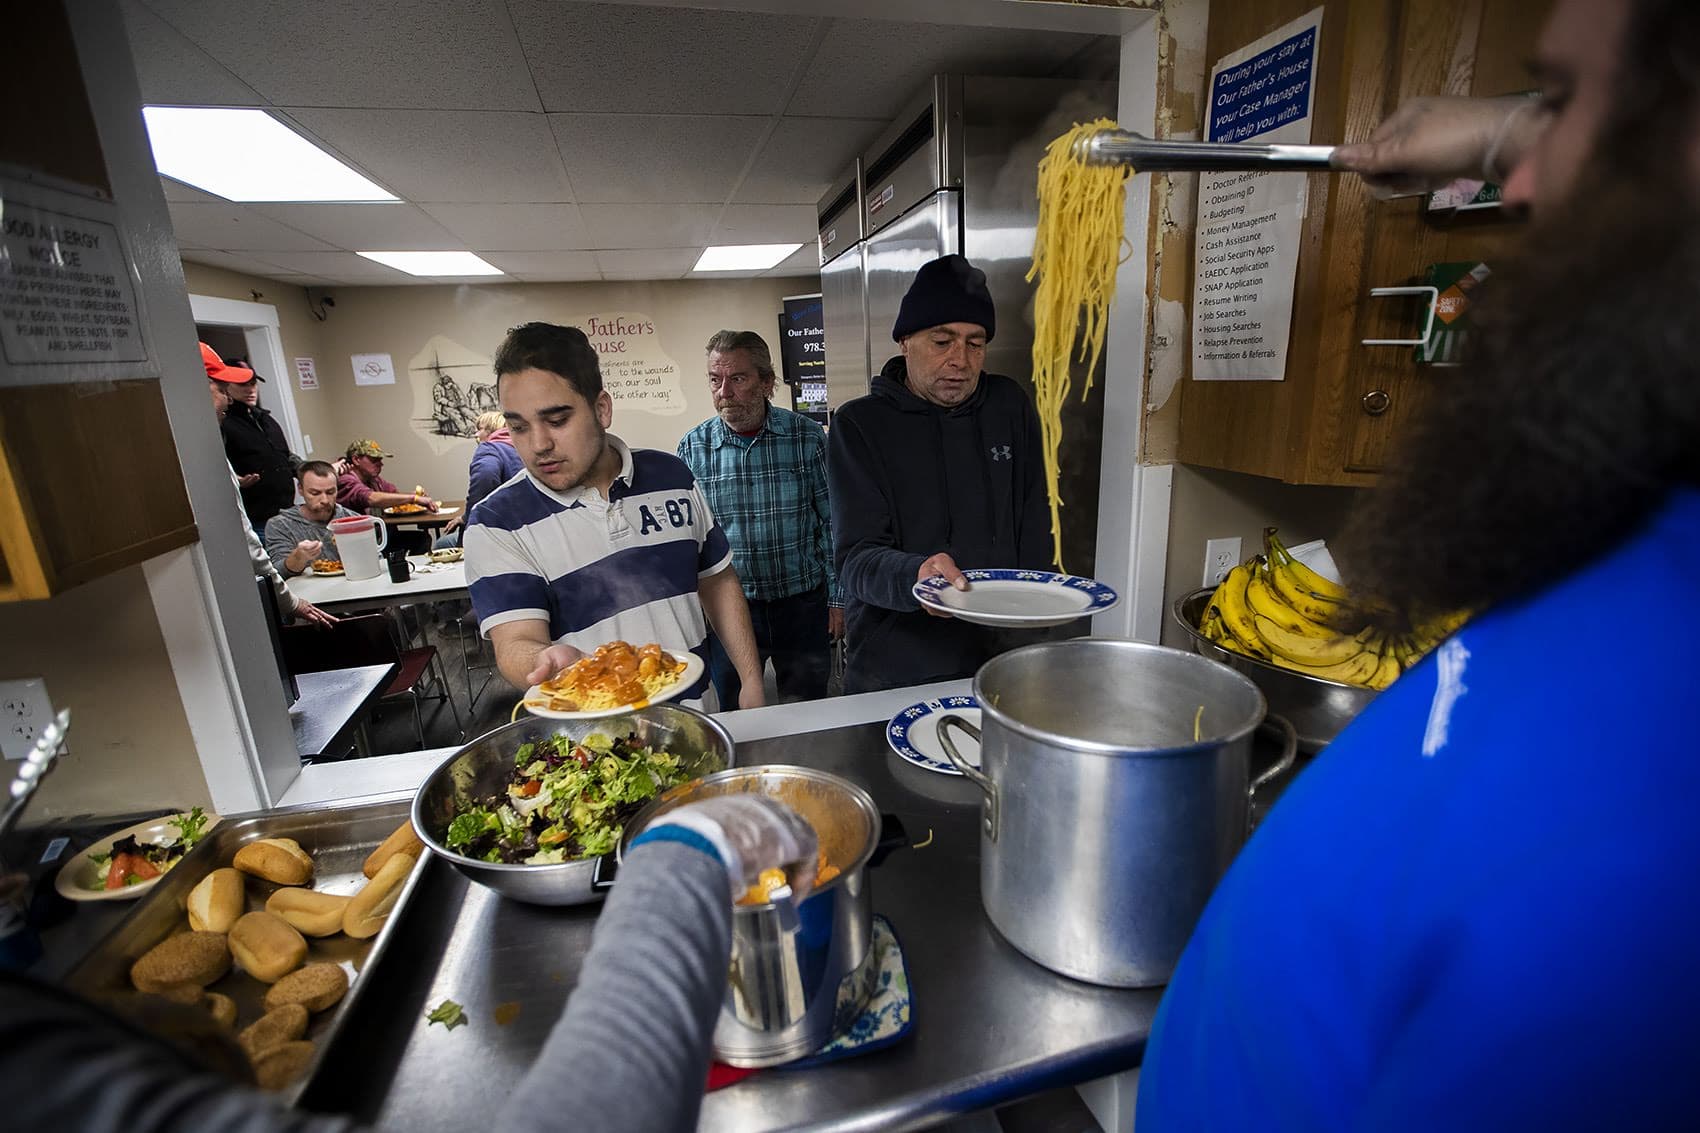 Guests recieve a spaghetti dinner at Our Father’s House in Fitchburg. (Jesse Costa/WBUR)